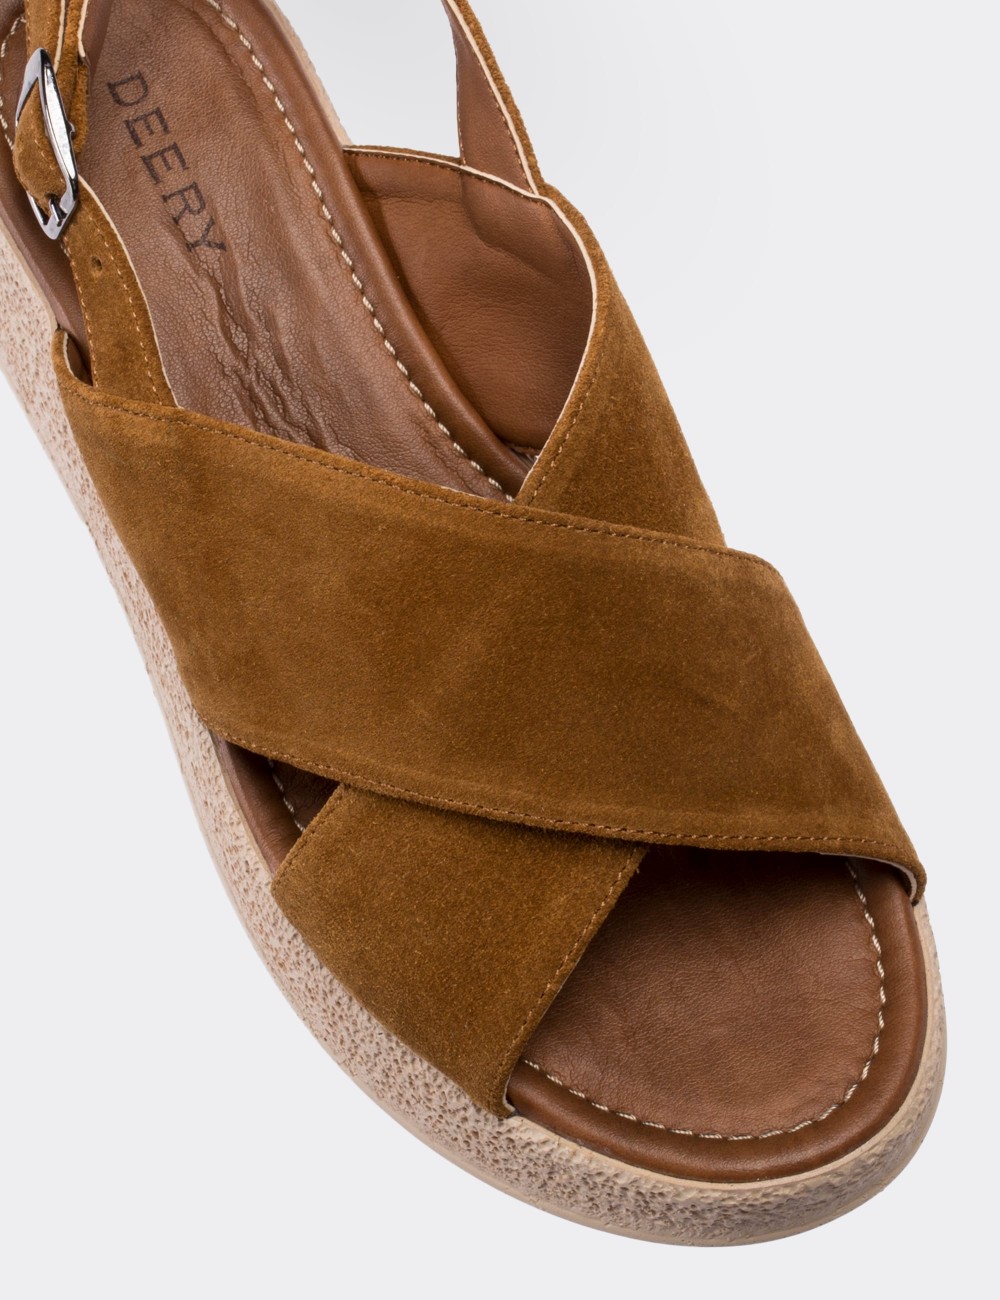 Tan Suede Leather  Sandals - 02126ZTBAP01